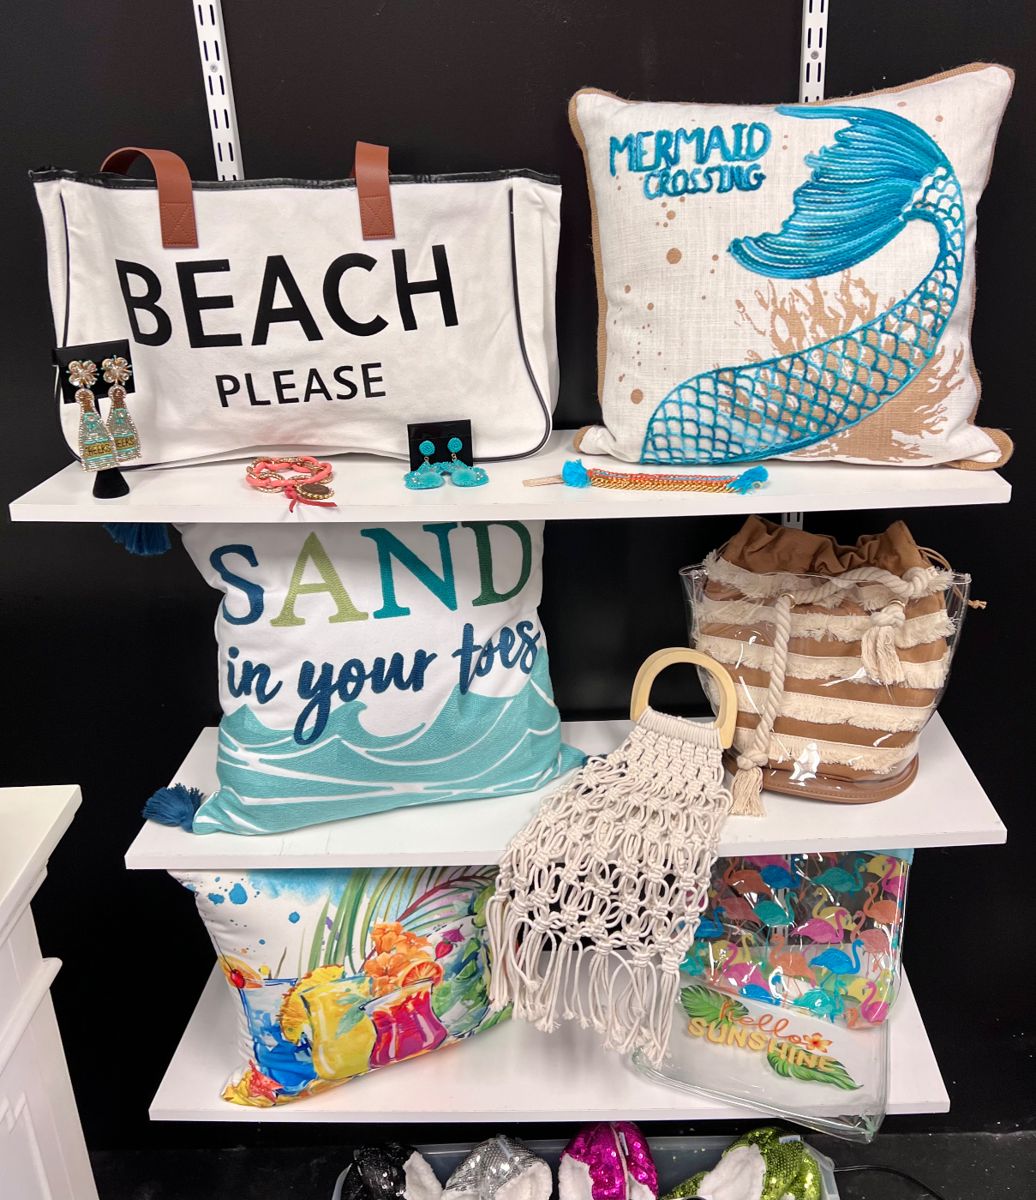 Beach Bags, Throw Pillows, Purses and Jewelry